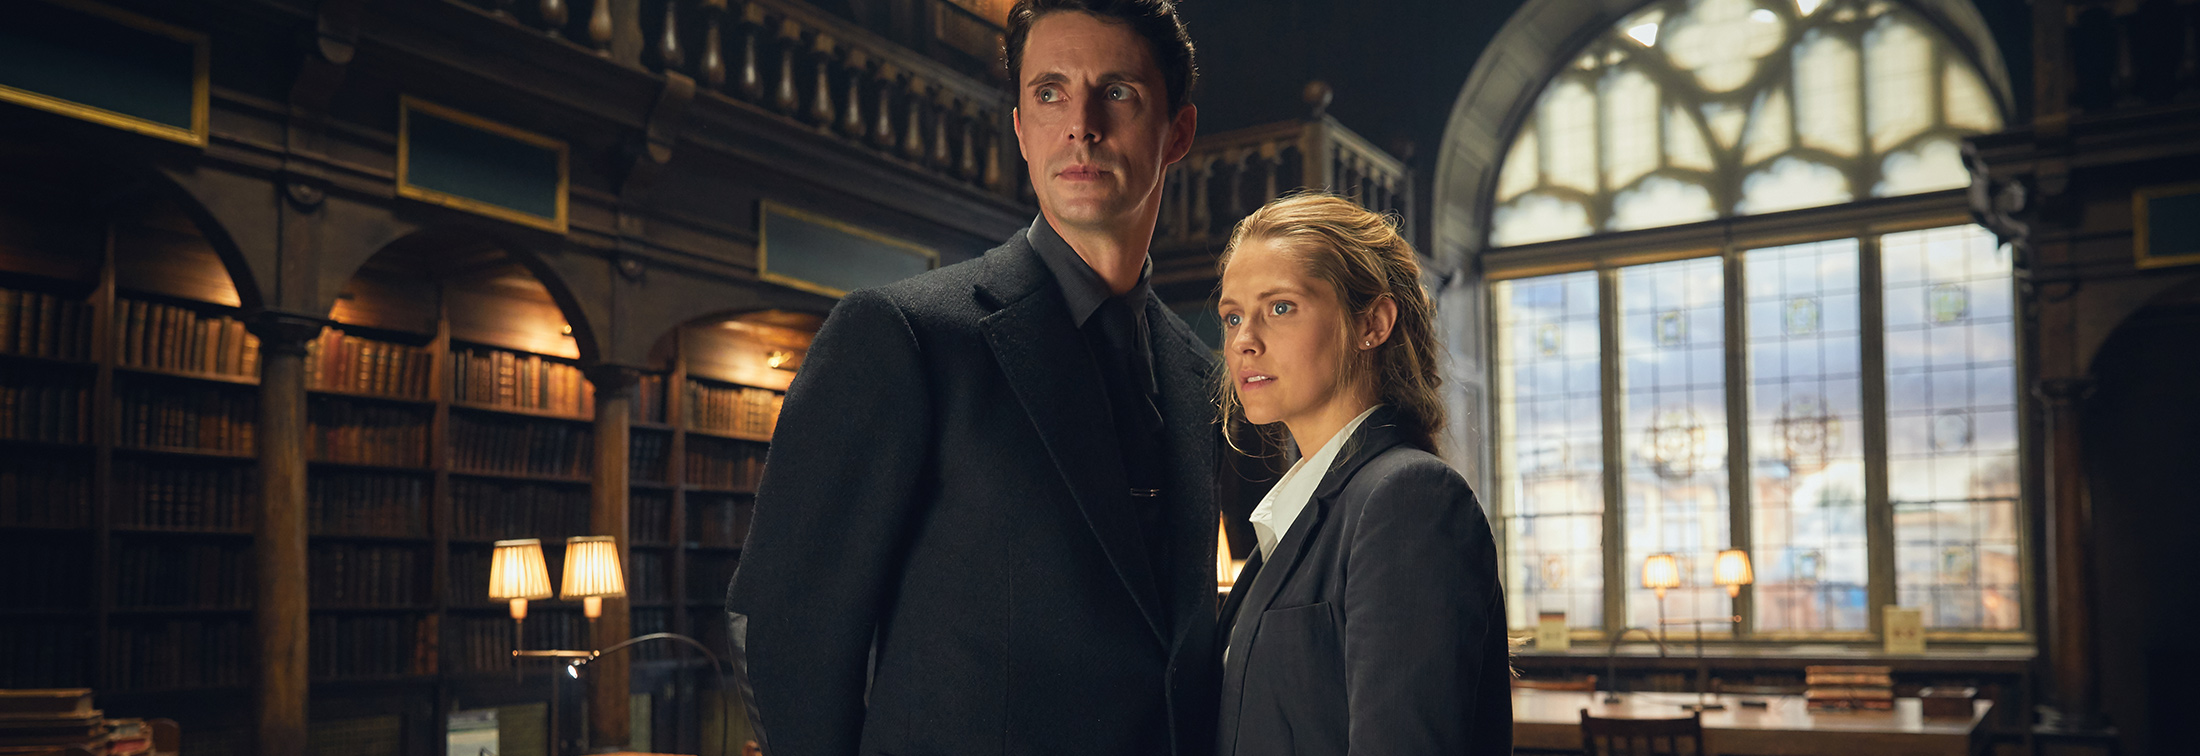 A Discovery of Witches - Teresa Palmer and Matthew Goode's supernatural drama